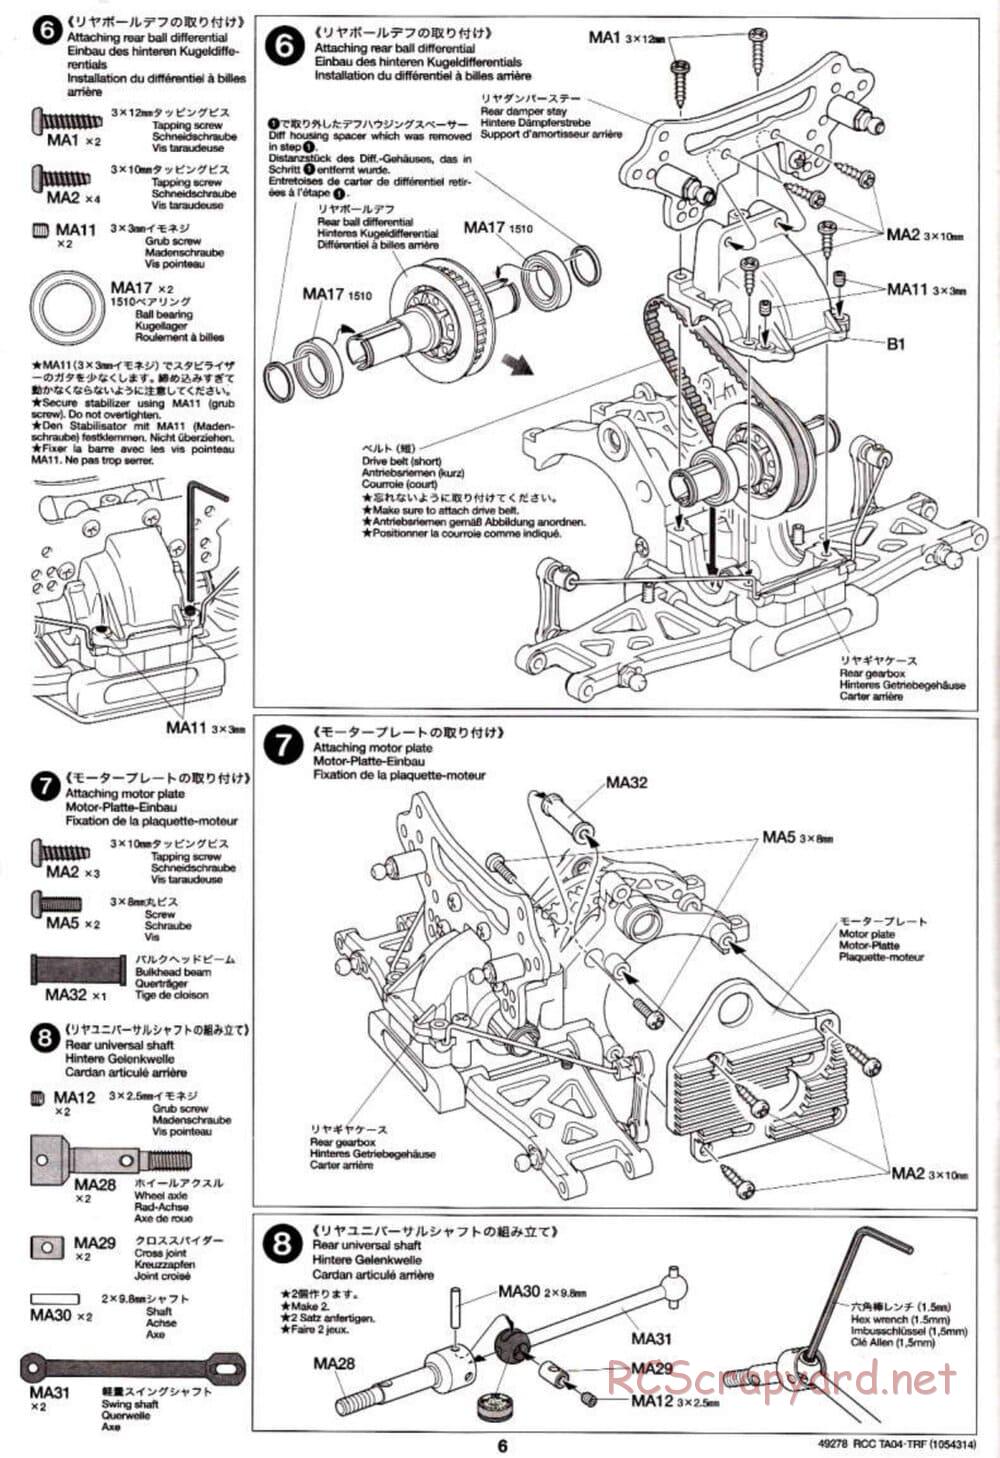 Tamiya - TA-04 TRF Special Chassis Chassis - Manual - Page 6